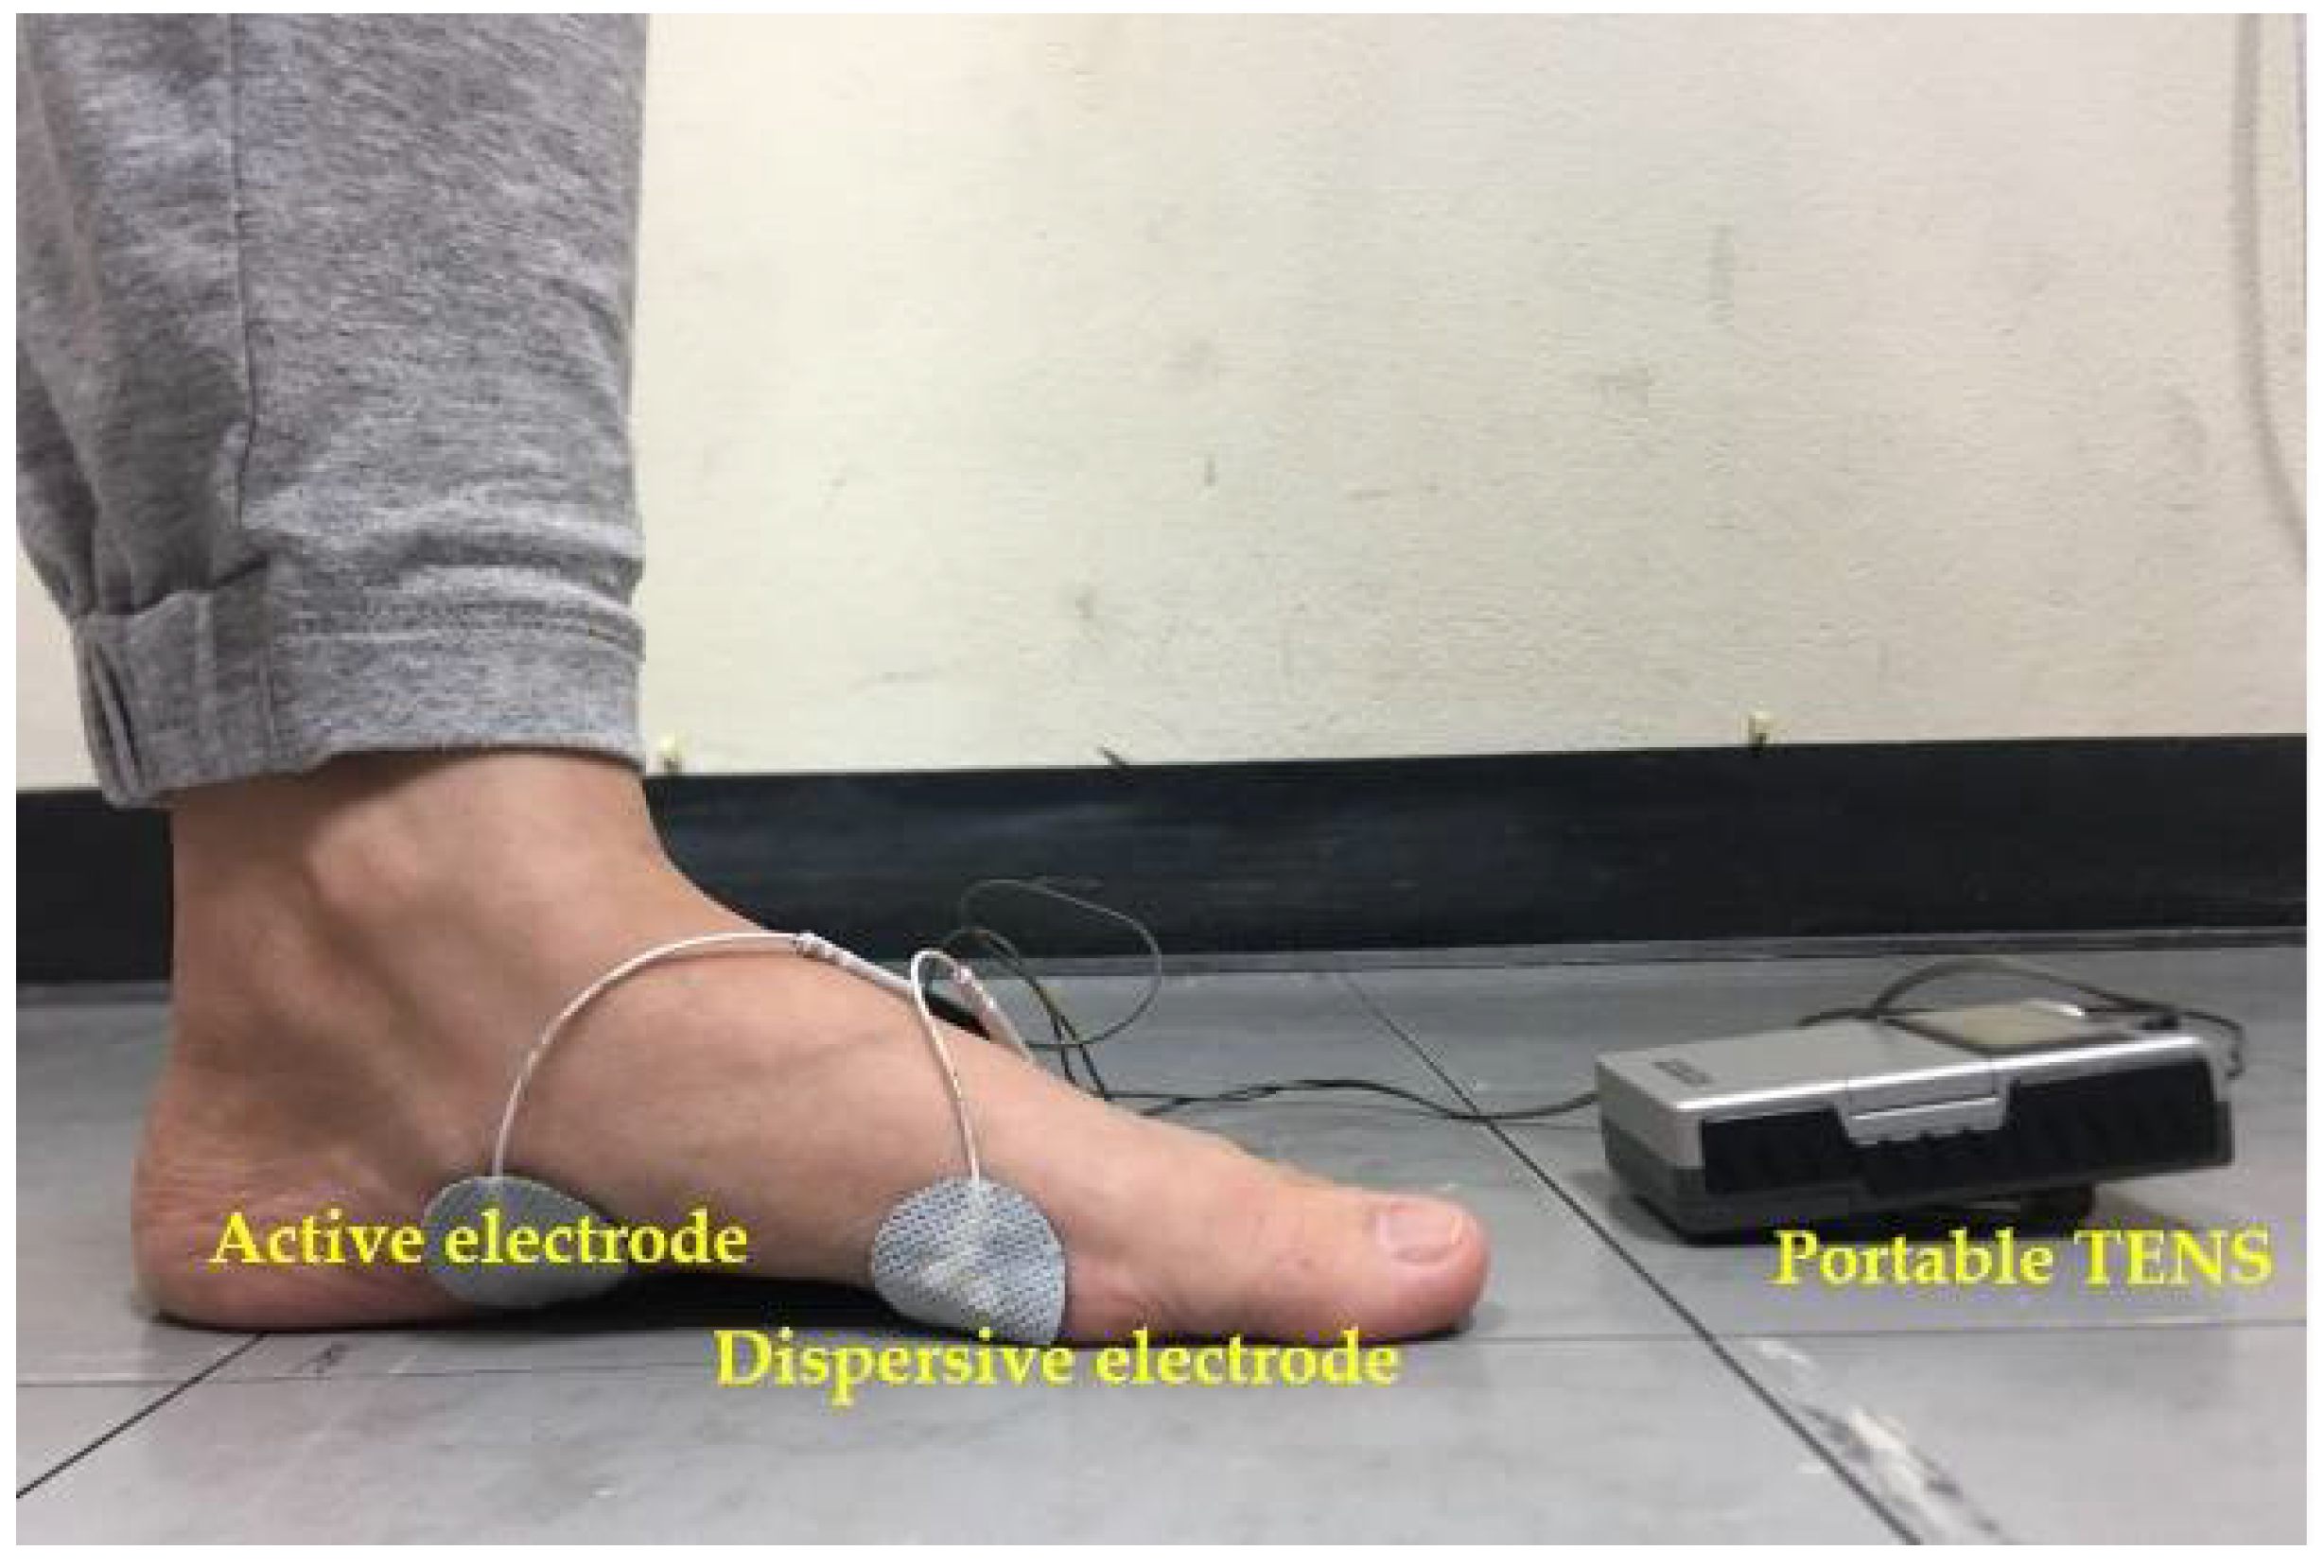 IJERPH Free Full-Text The Effects of Electrical Stimulation Program on Navicular Height, Balance, and Fear of Falling in Community-Dwelling Elderly